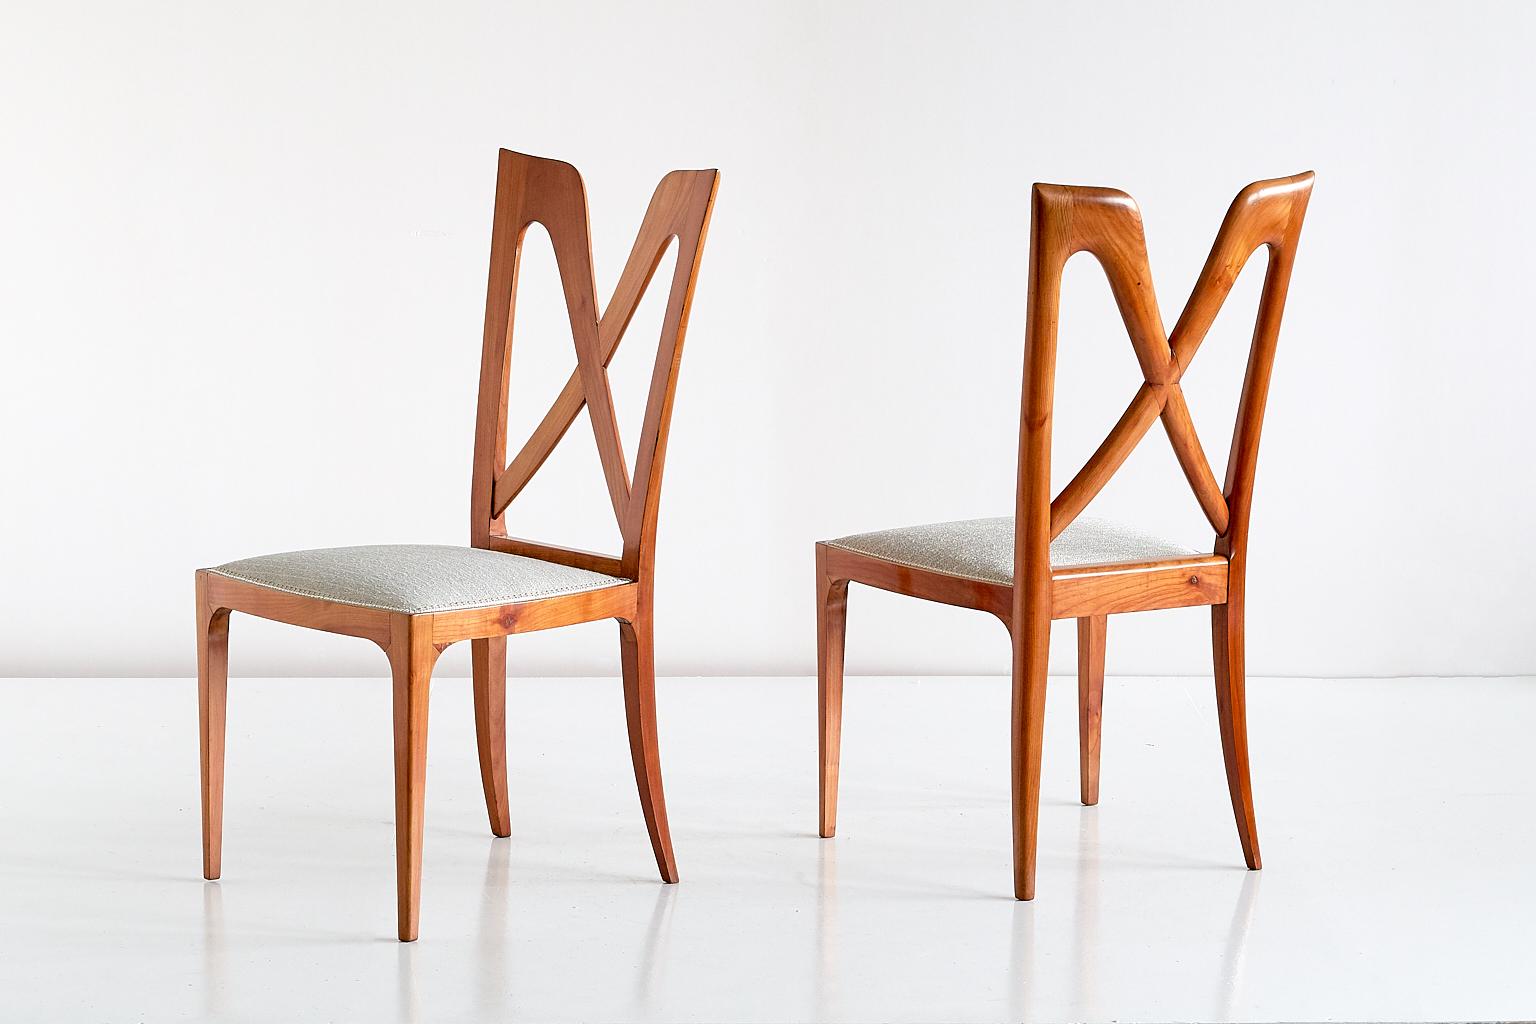 Polished Set of Six Ulderico Carlo Forni Dining Chairs in Cherry Wood, Italy, 1940s For Sale